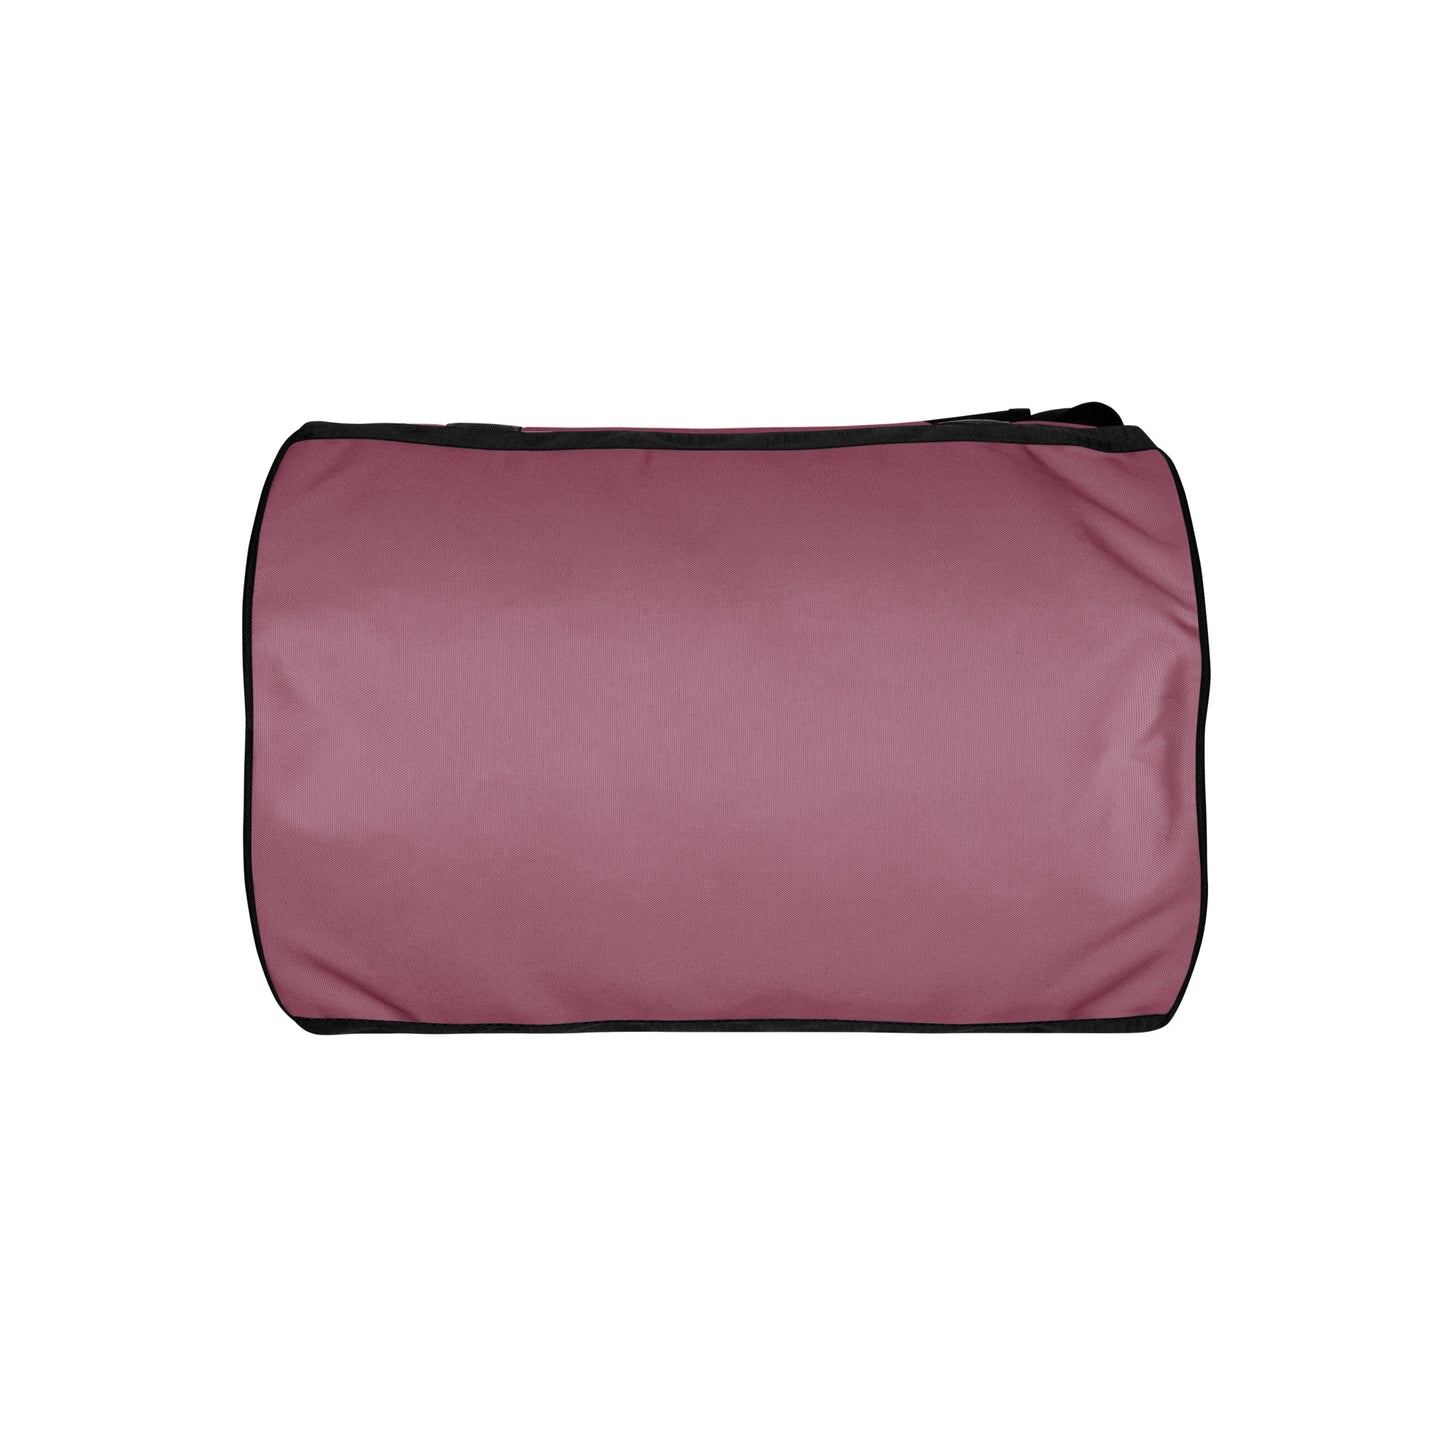 Dusty Rose 'Fit In' gym bag